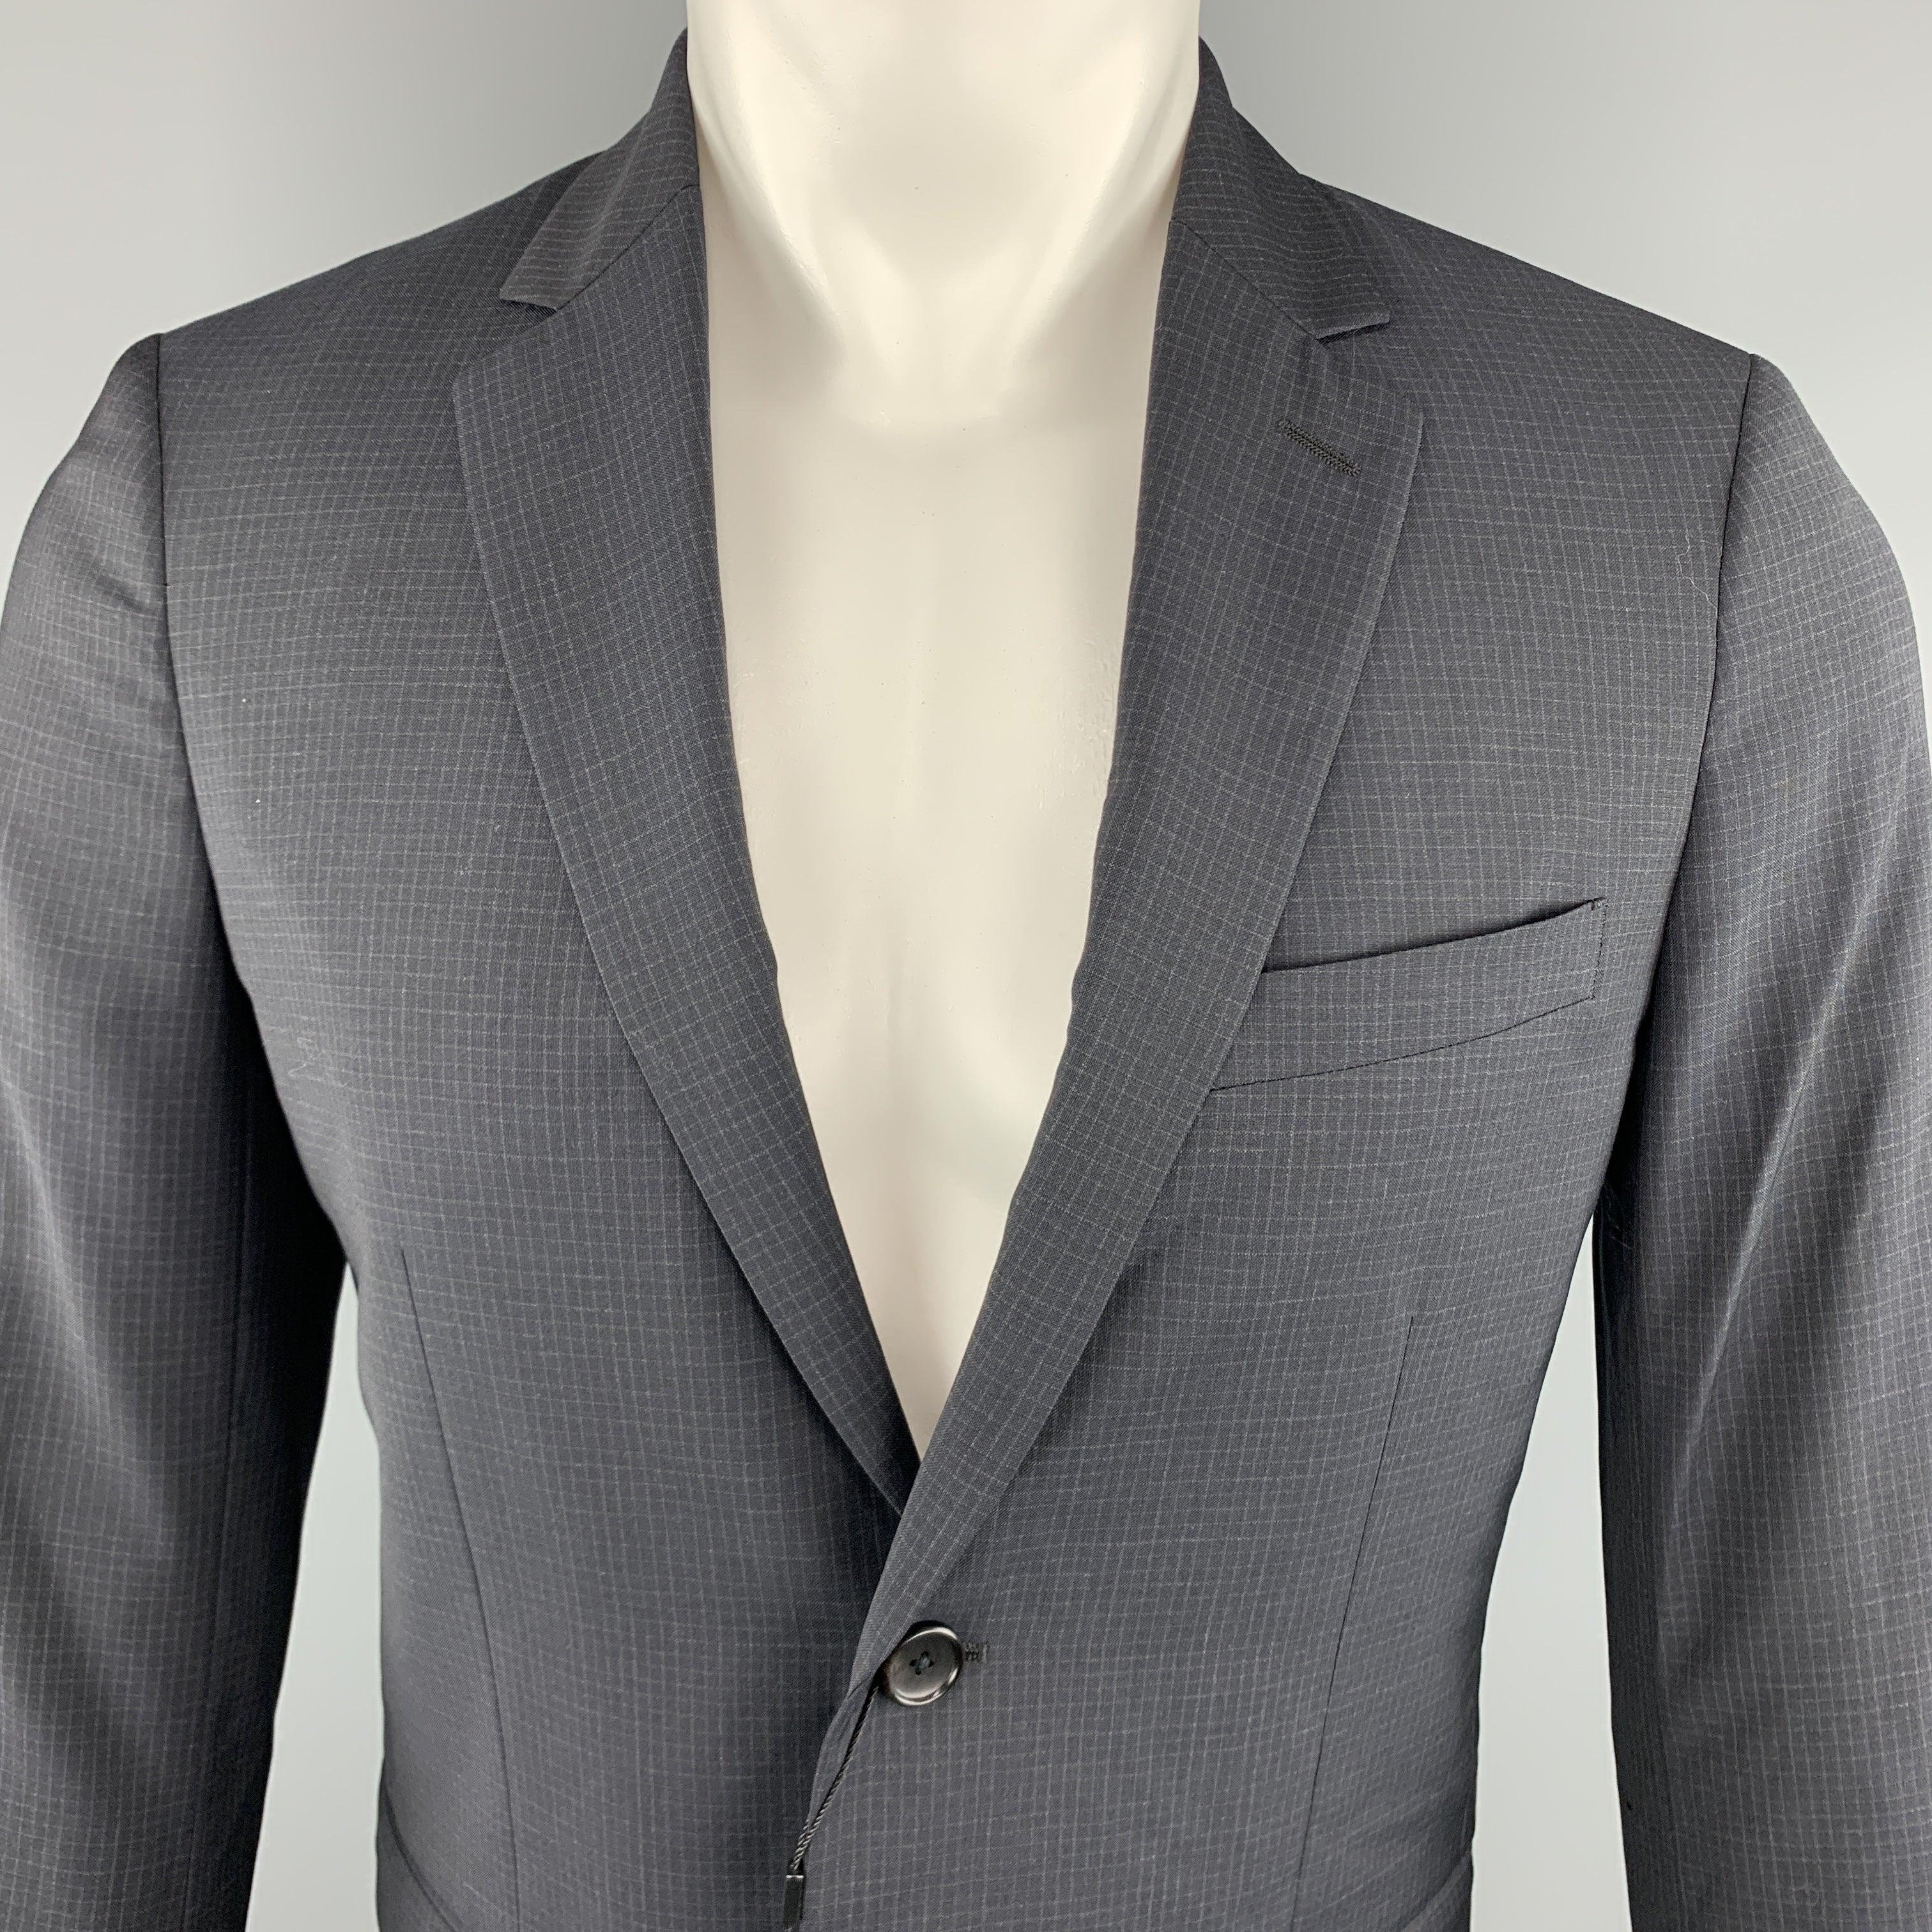 THEORY Wellar Sport Coat
comes in a navy tone in a grid wool material, with a notch lapel, slit and flap pockets, two buttons at closure, single breasted, buttoned cuffs and a single vent at back.New With Tags. 

Marked:   38R 

Measurements: 
